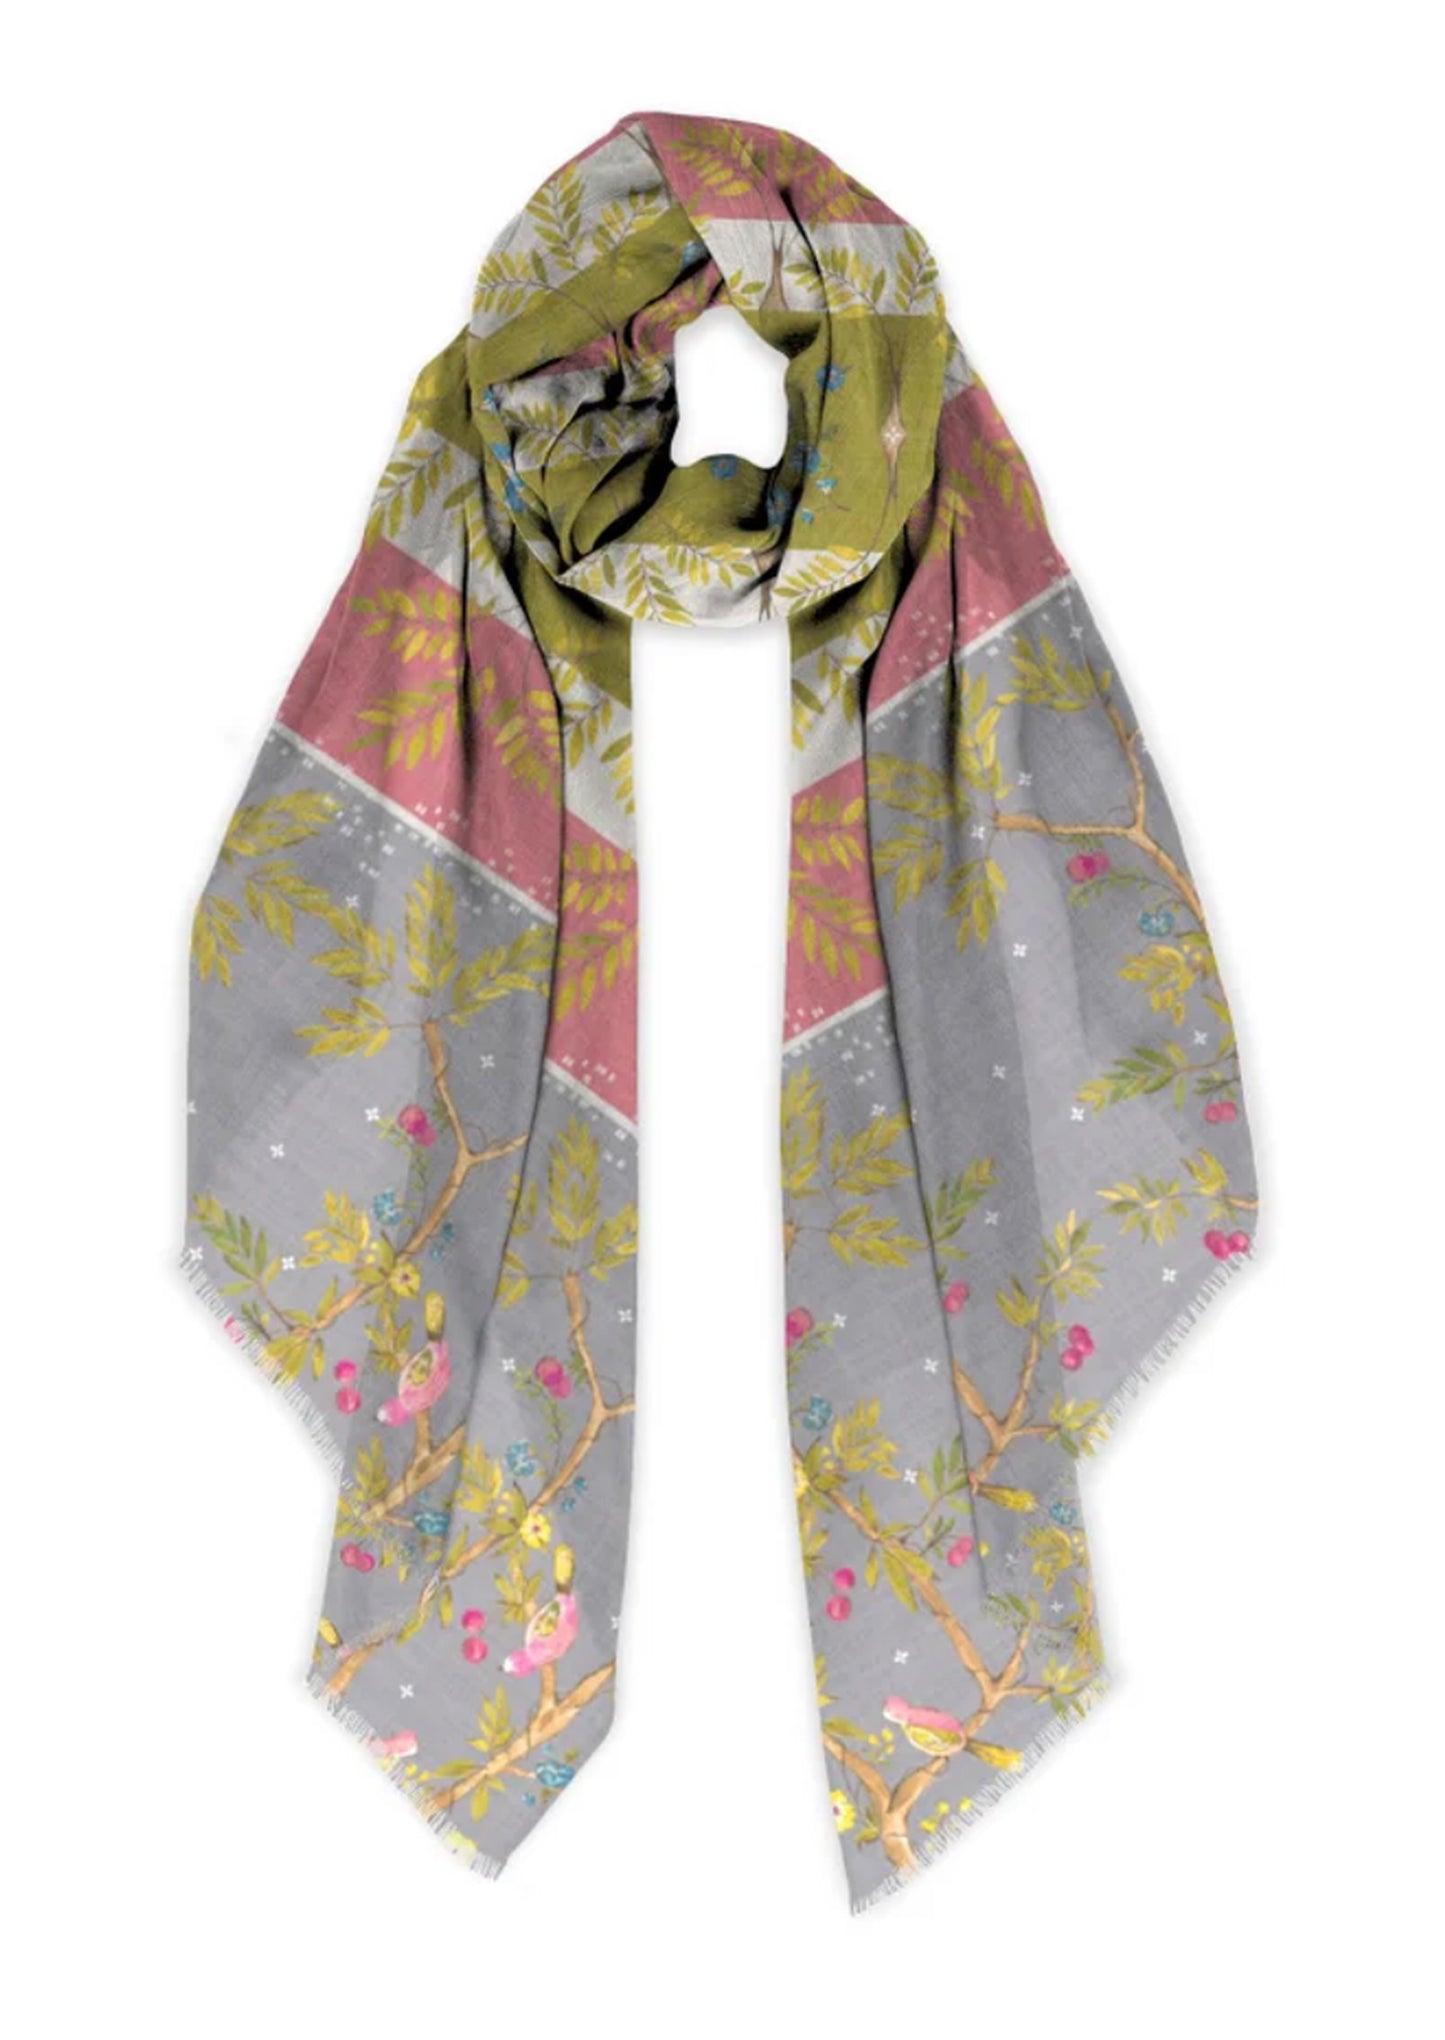 "Out On A Limb" Scarf